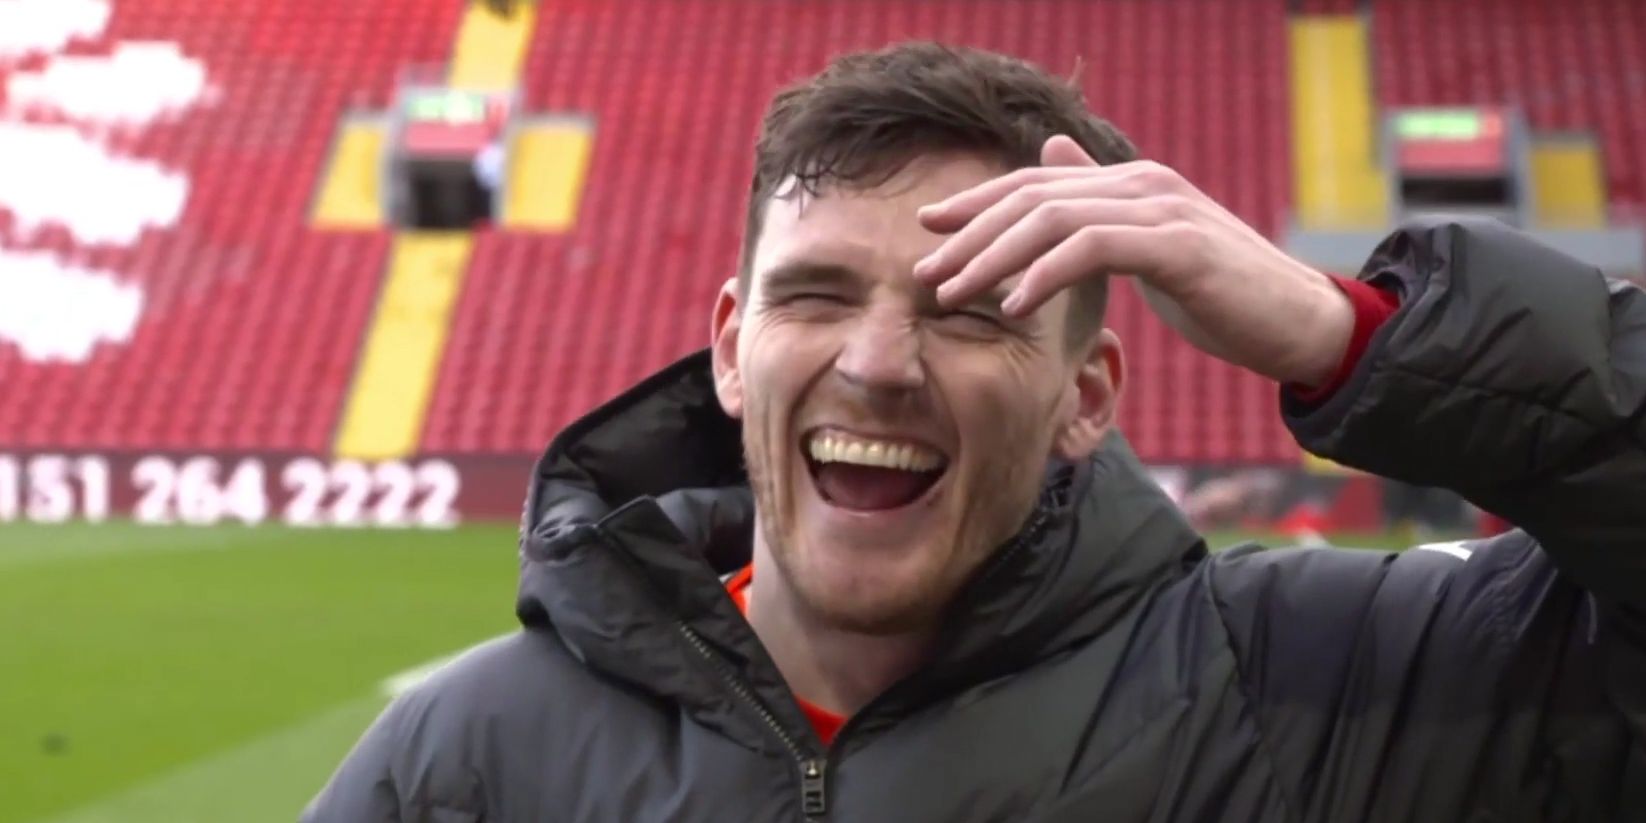 (Video) “You’re discrediting my Villa away game there!” – Andy Robertson quick to remind interviewer of most important goal